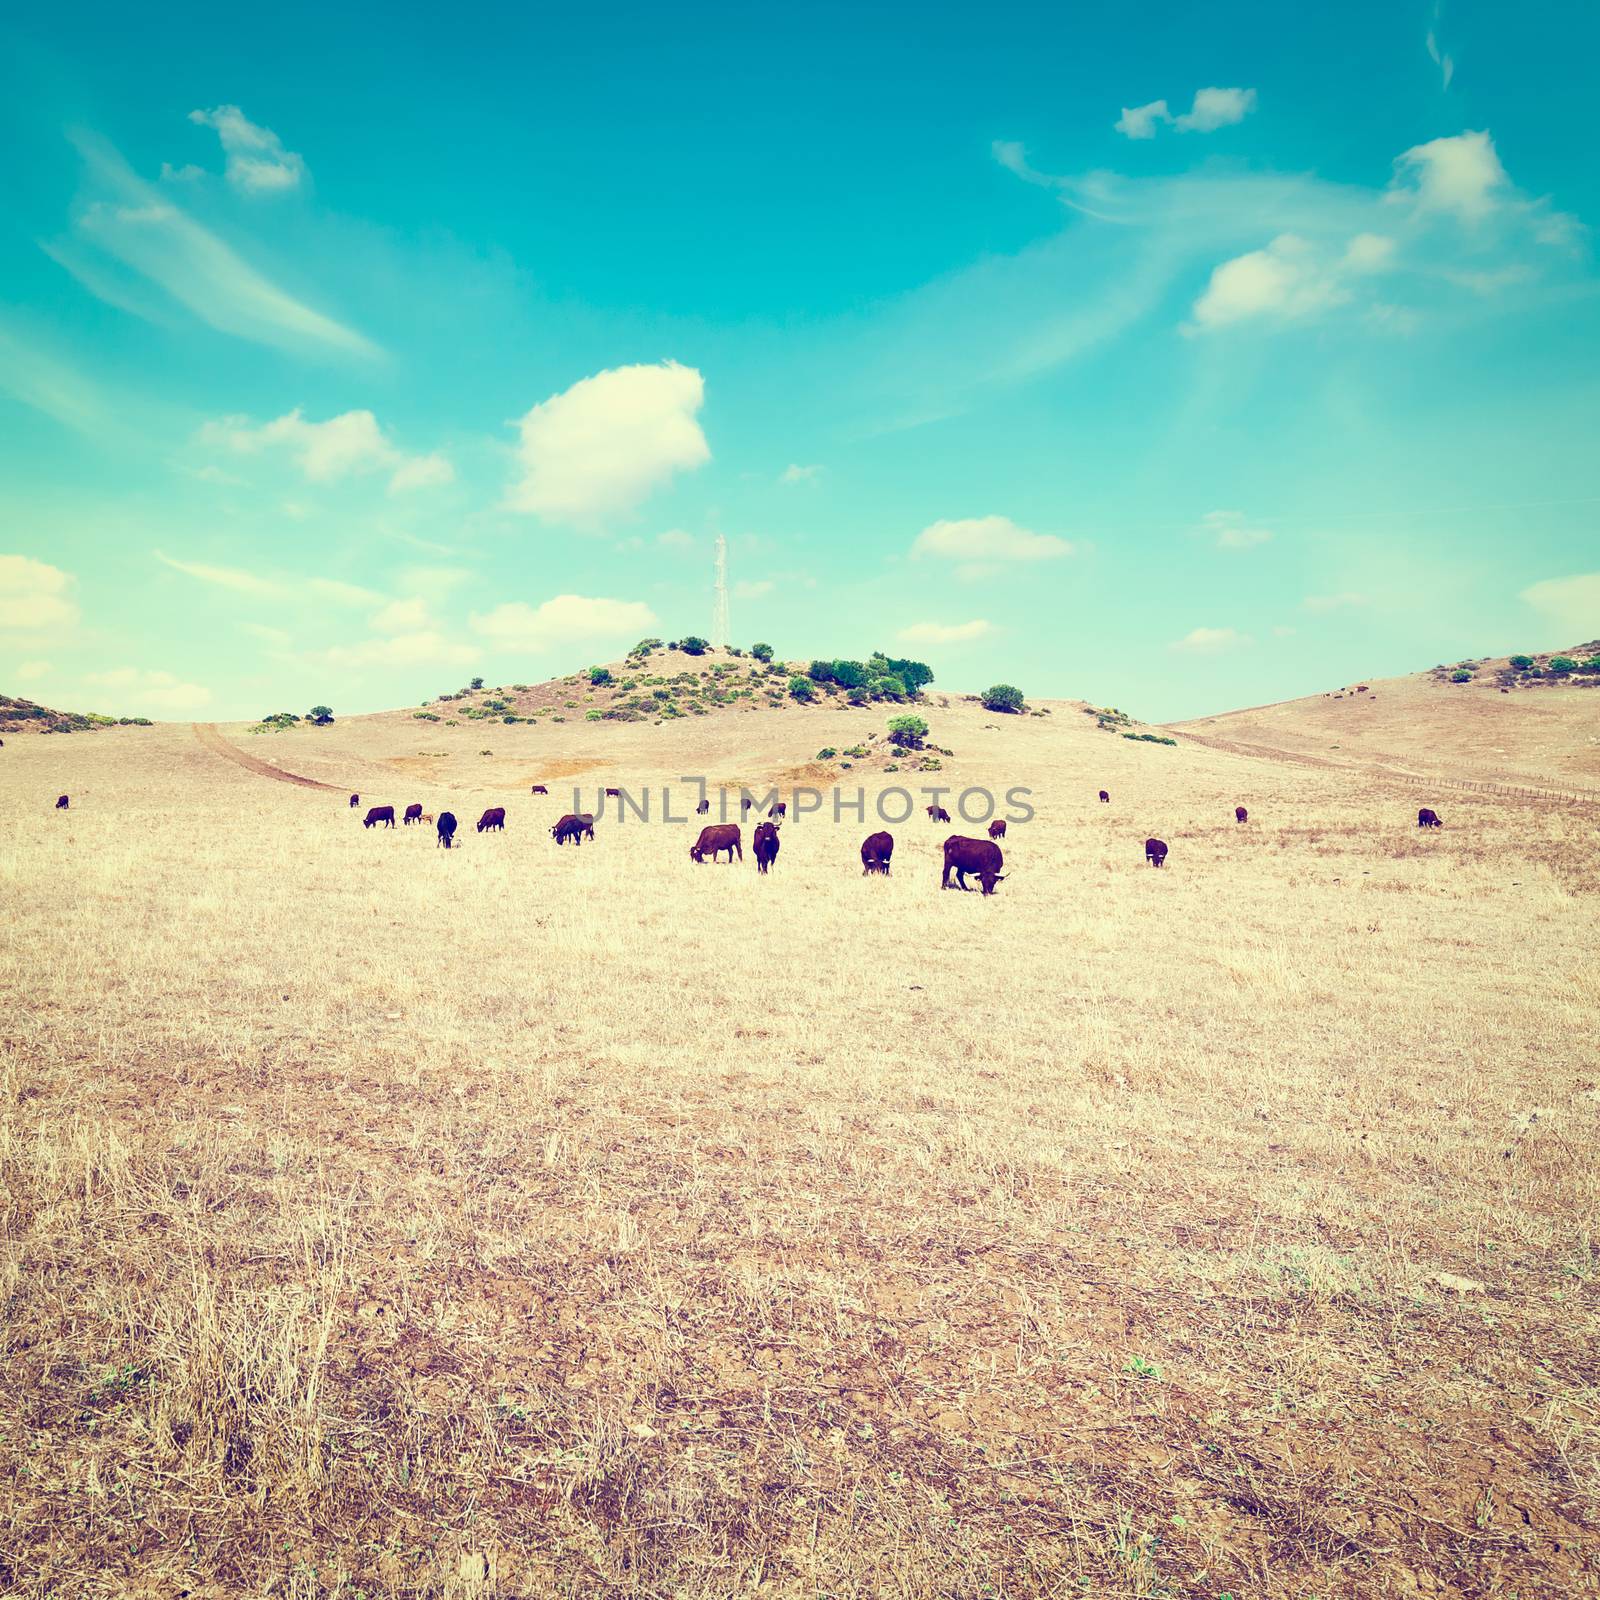 Cows Grazing on Dried Pasture in Spain, Instagram Effect